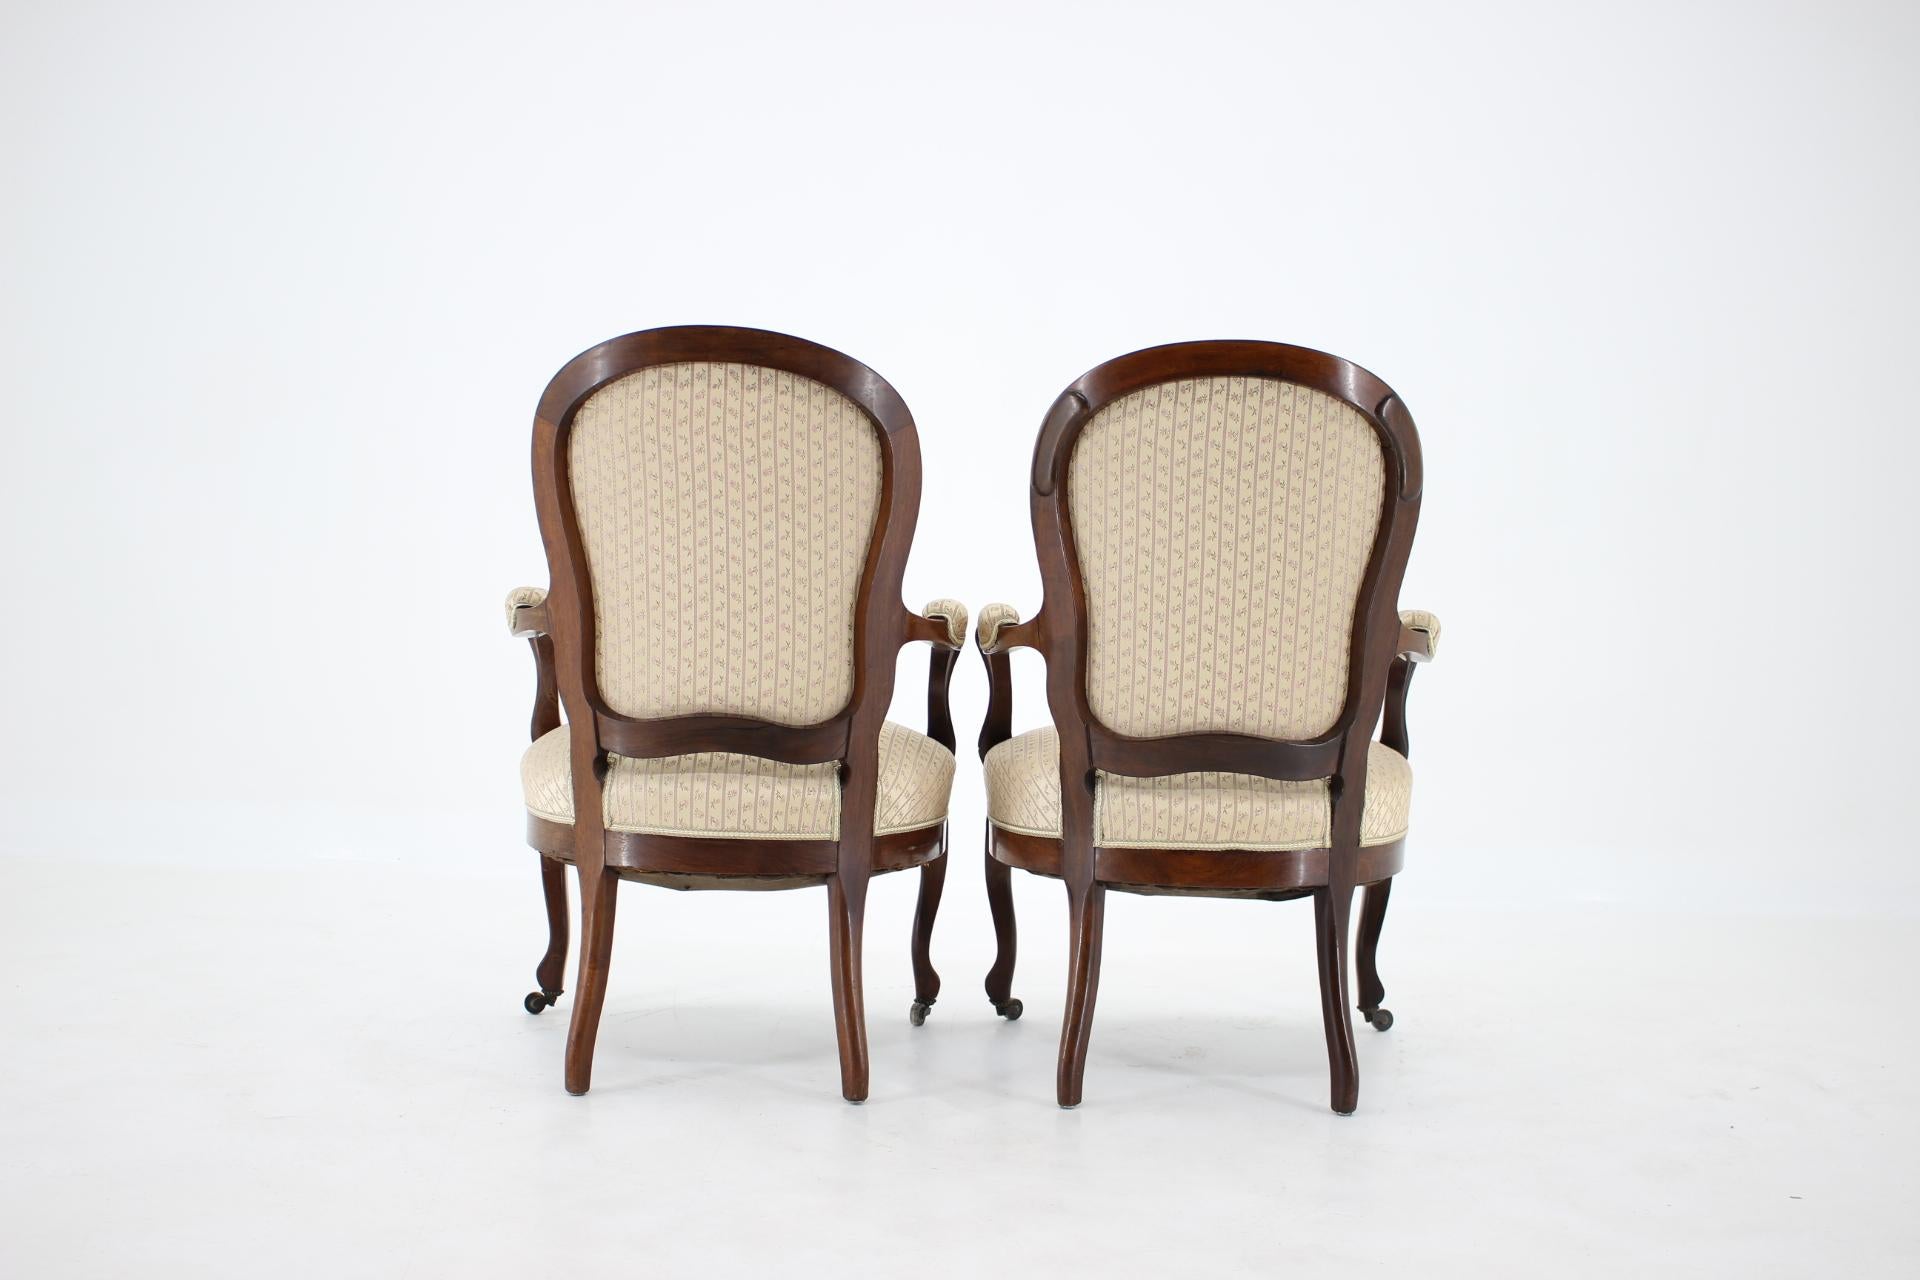 1900s Pair of Original Danish Rococo Chairs For Sale 2